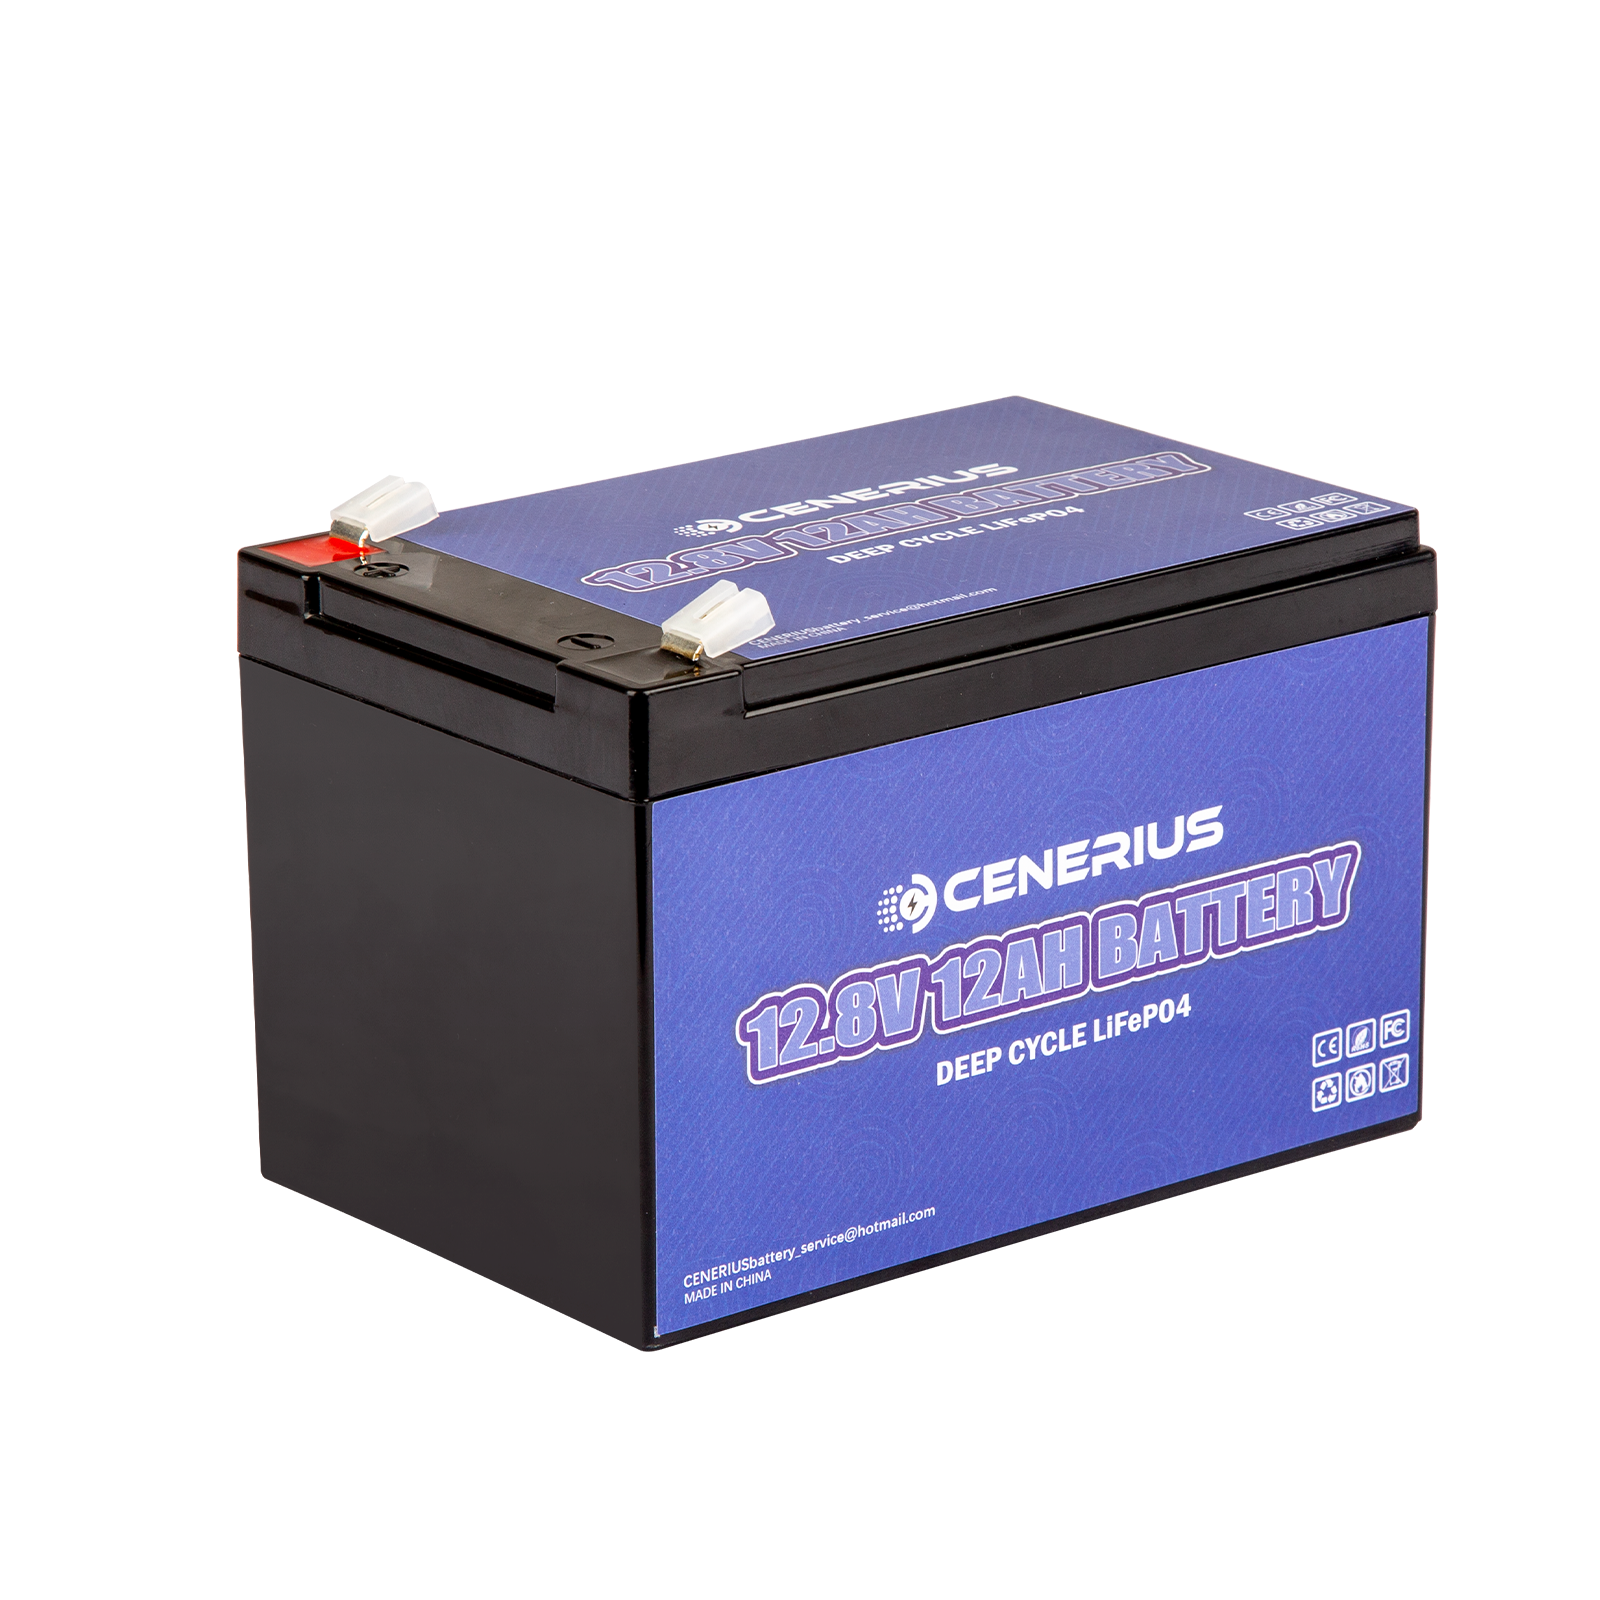 Cenerius 12V 12Ah LiFePO4 Lithium Battery with 12A BMS,153.6Wh Energy,Deep  Cycle Rechargeable Battery Up to 4000 Cycles Perfect for Solar System, UPS,  Lighting, Scooters, Fish Finders, Power Wheels,Emergency lights, 12V  routers, Small